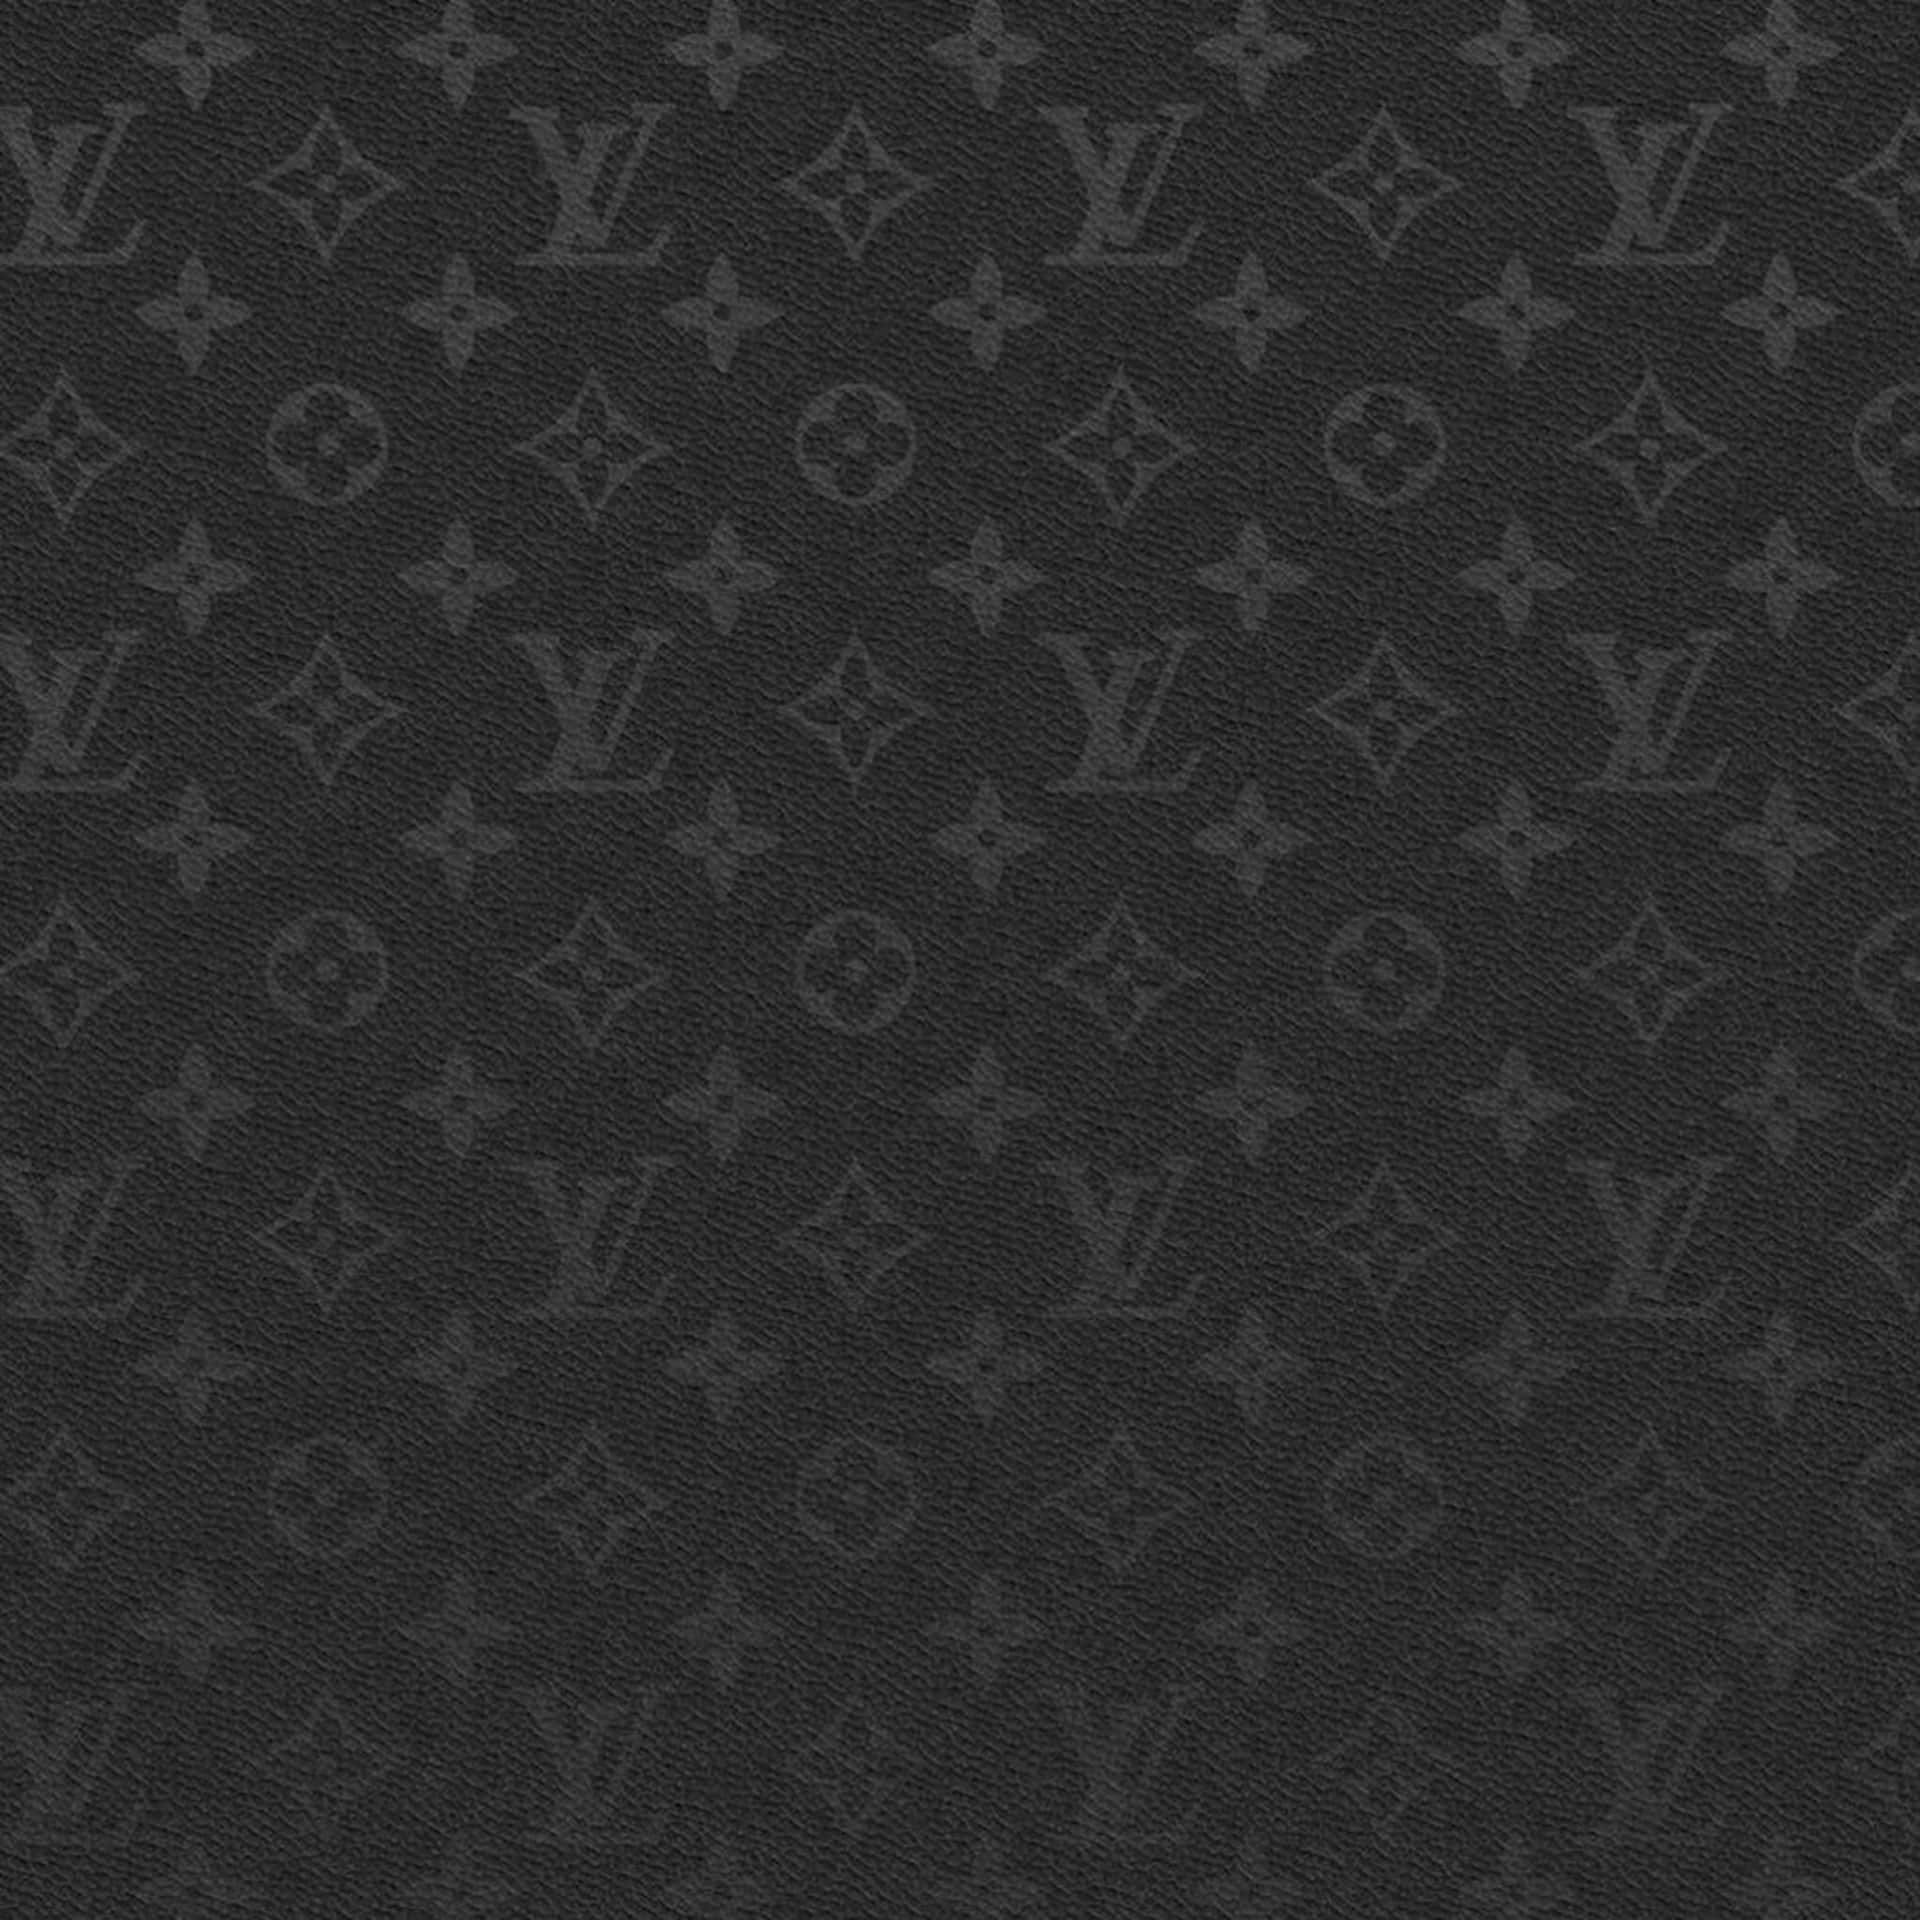 Download Louis Vuitton Fabric By Sassy_sassy On Spoonflower